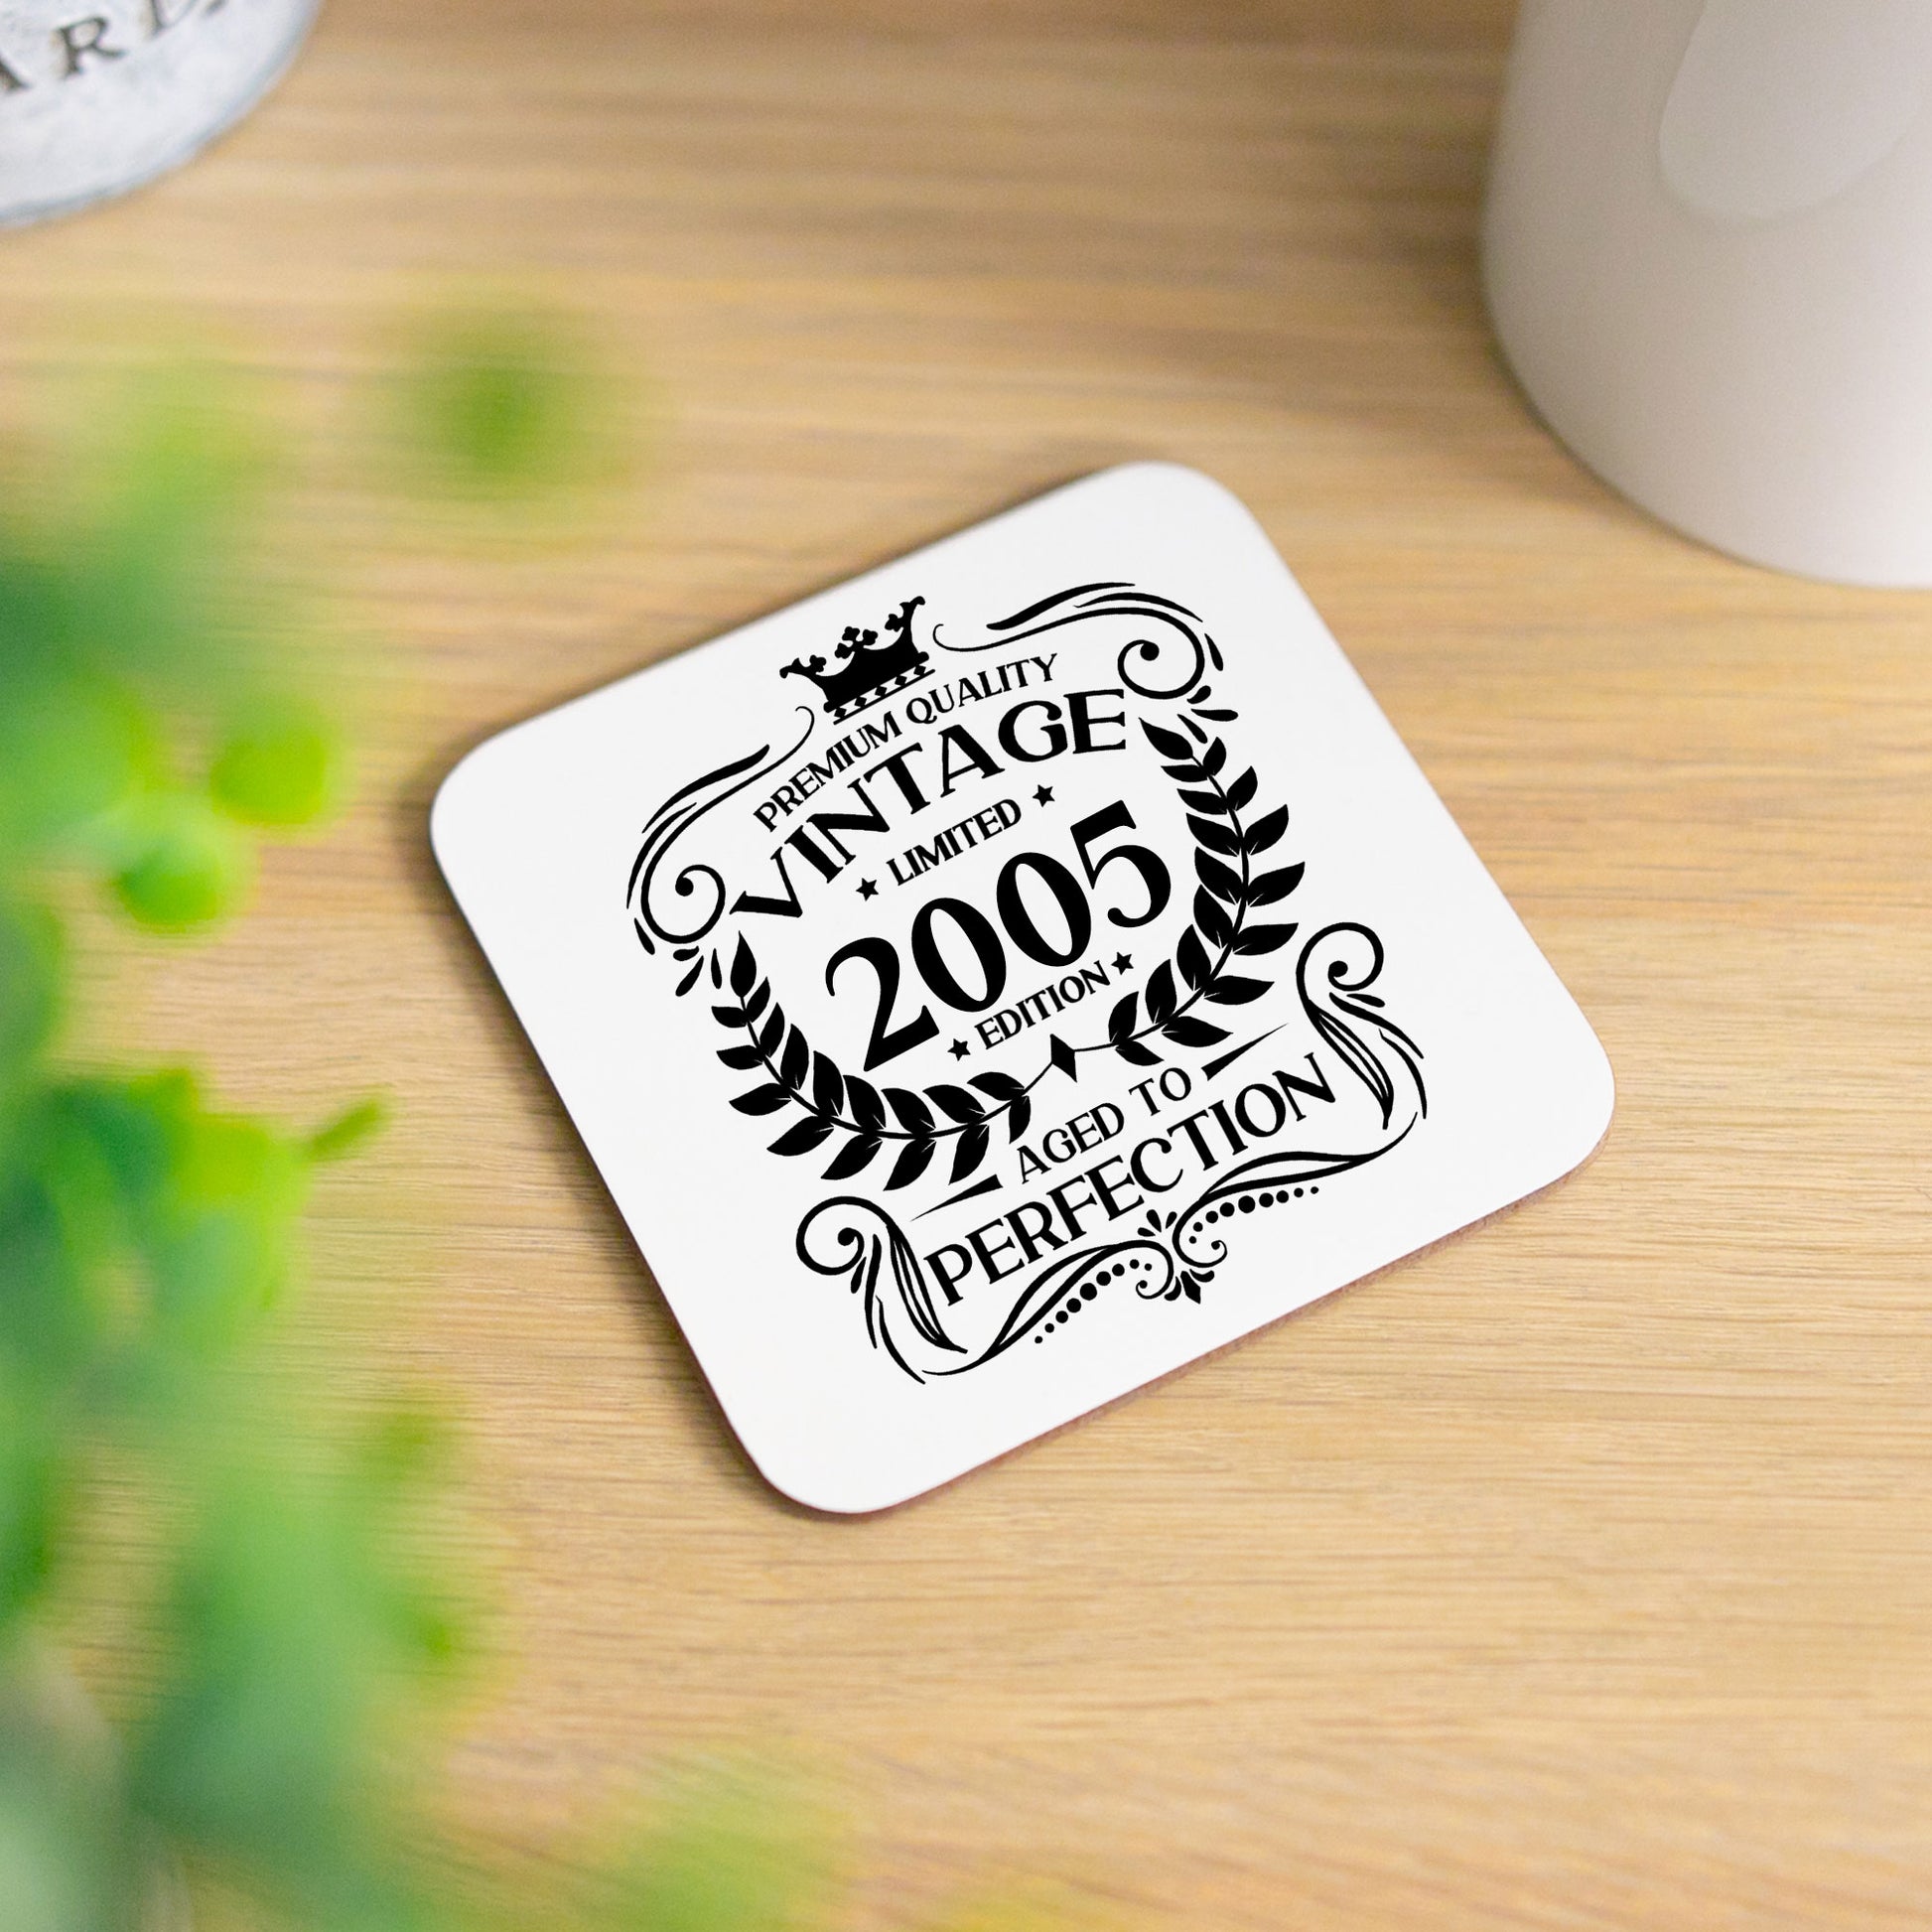 Vintage 2005 18th Birthday Engraved Wine Glass Gift  - Always Looking Good - Glass & Printed Coaster  